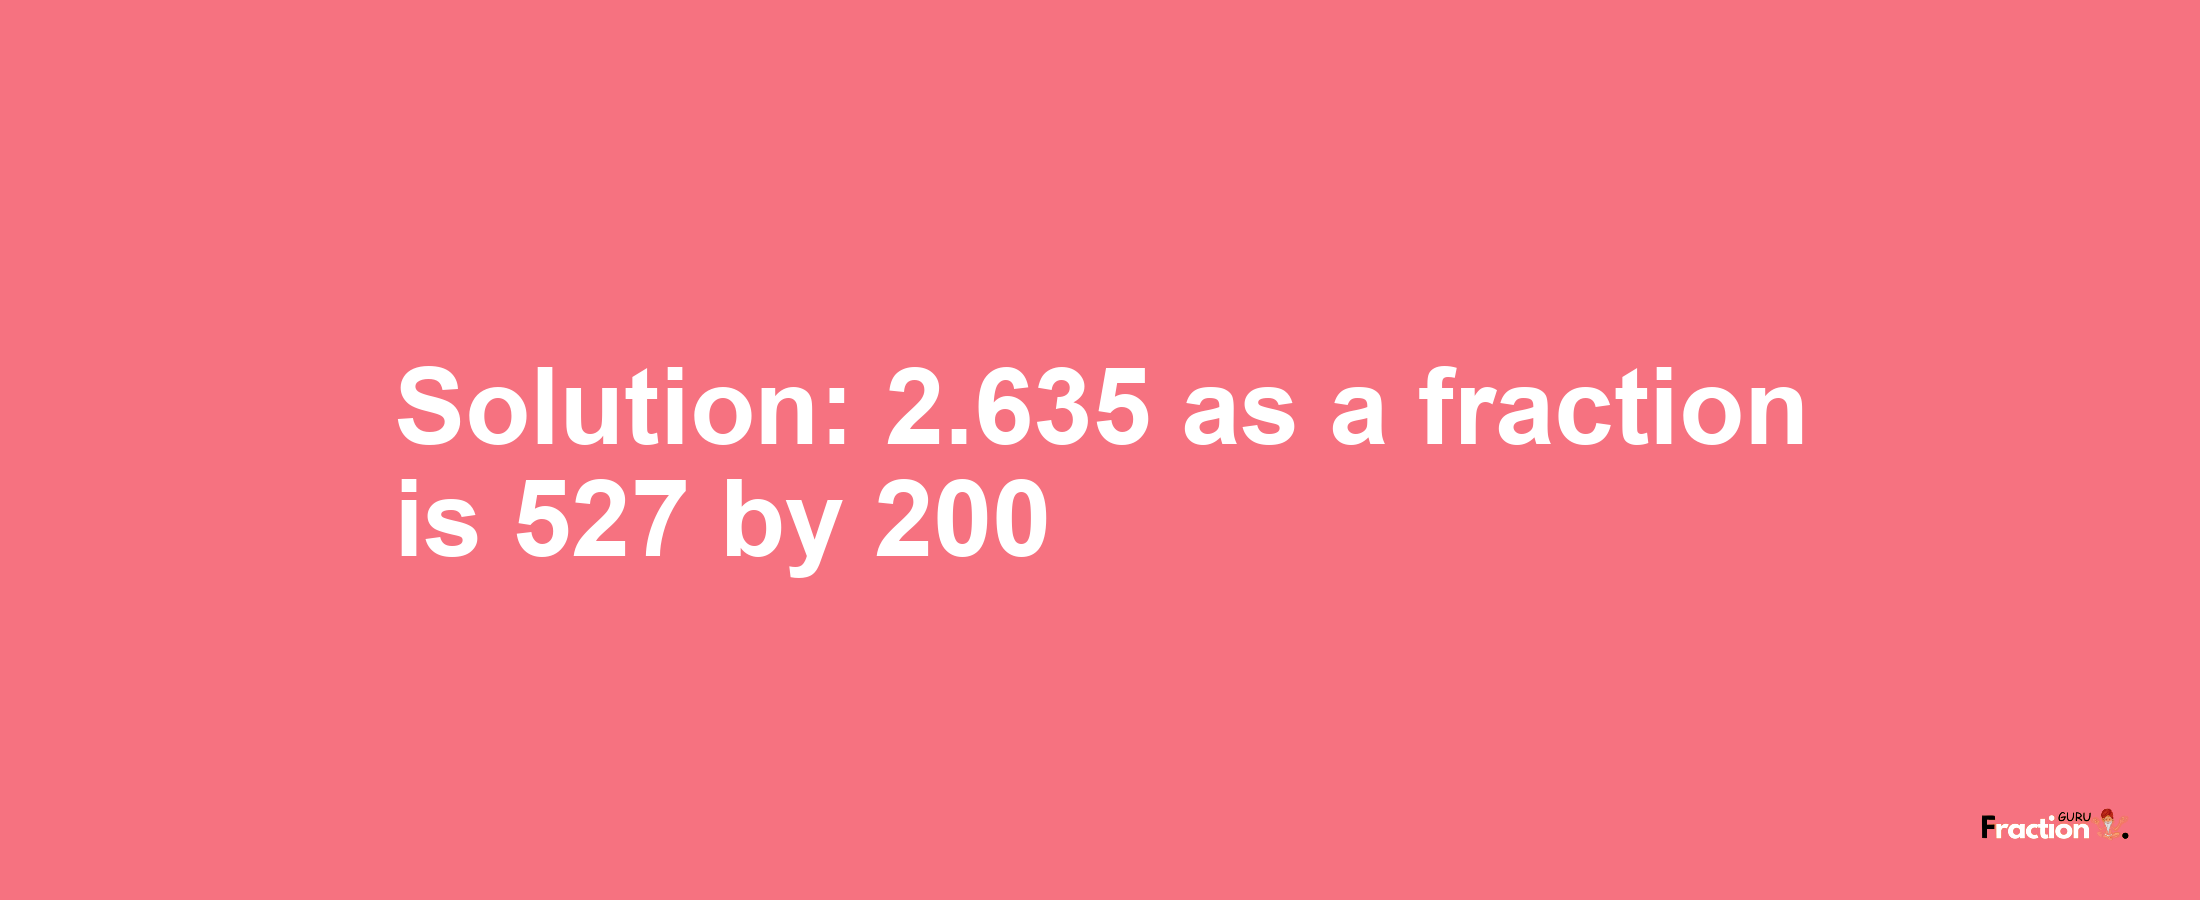 Solution:2.635 as a fraction is 527/200